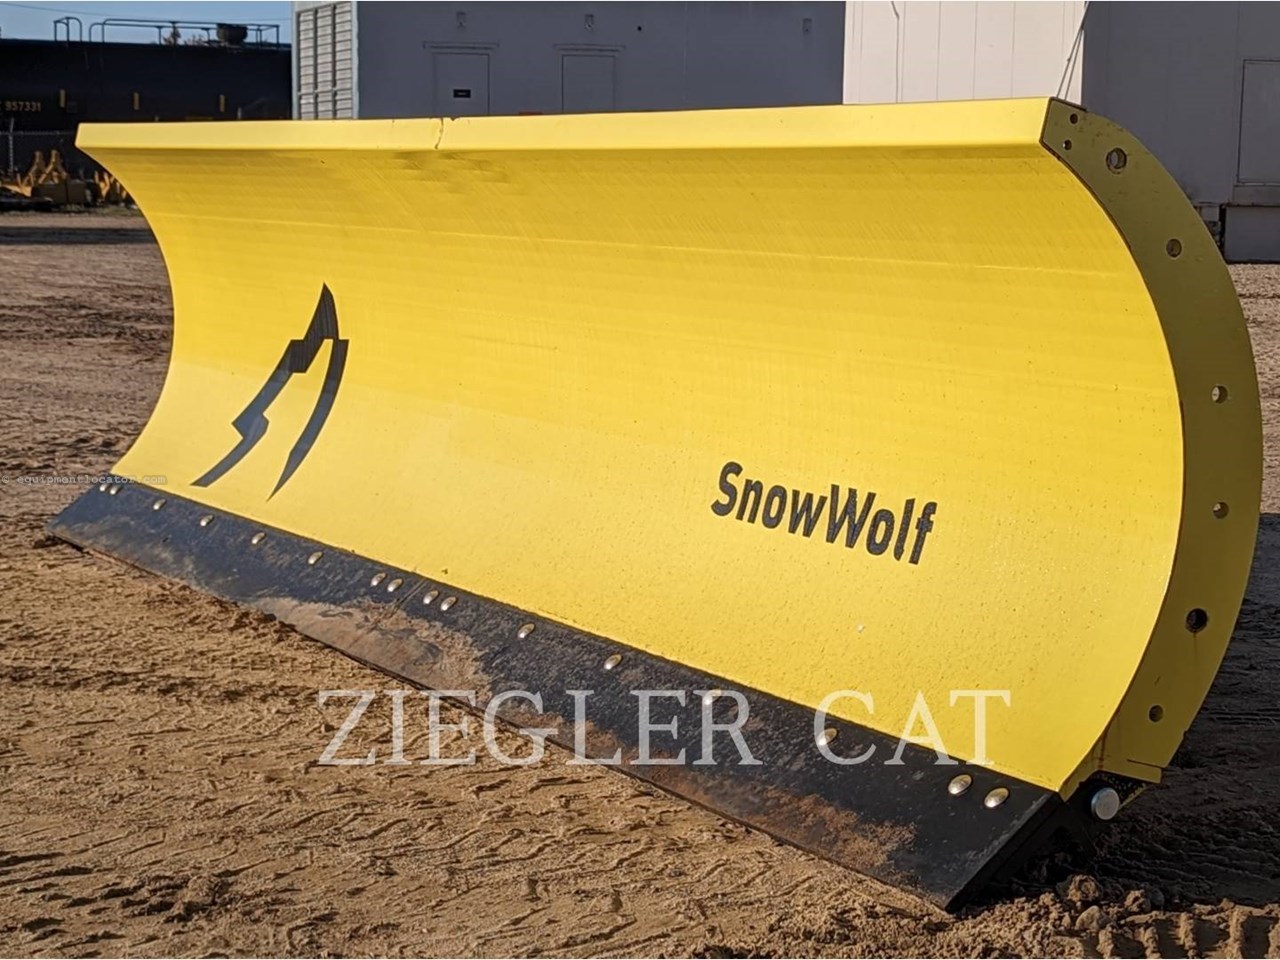 2020 Snow Wolf 926-950 WHEEL LOADER PLOW FUSION 12' Image 1